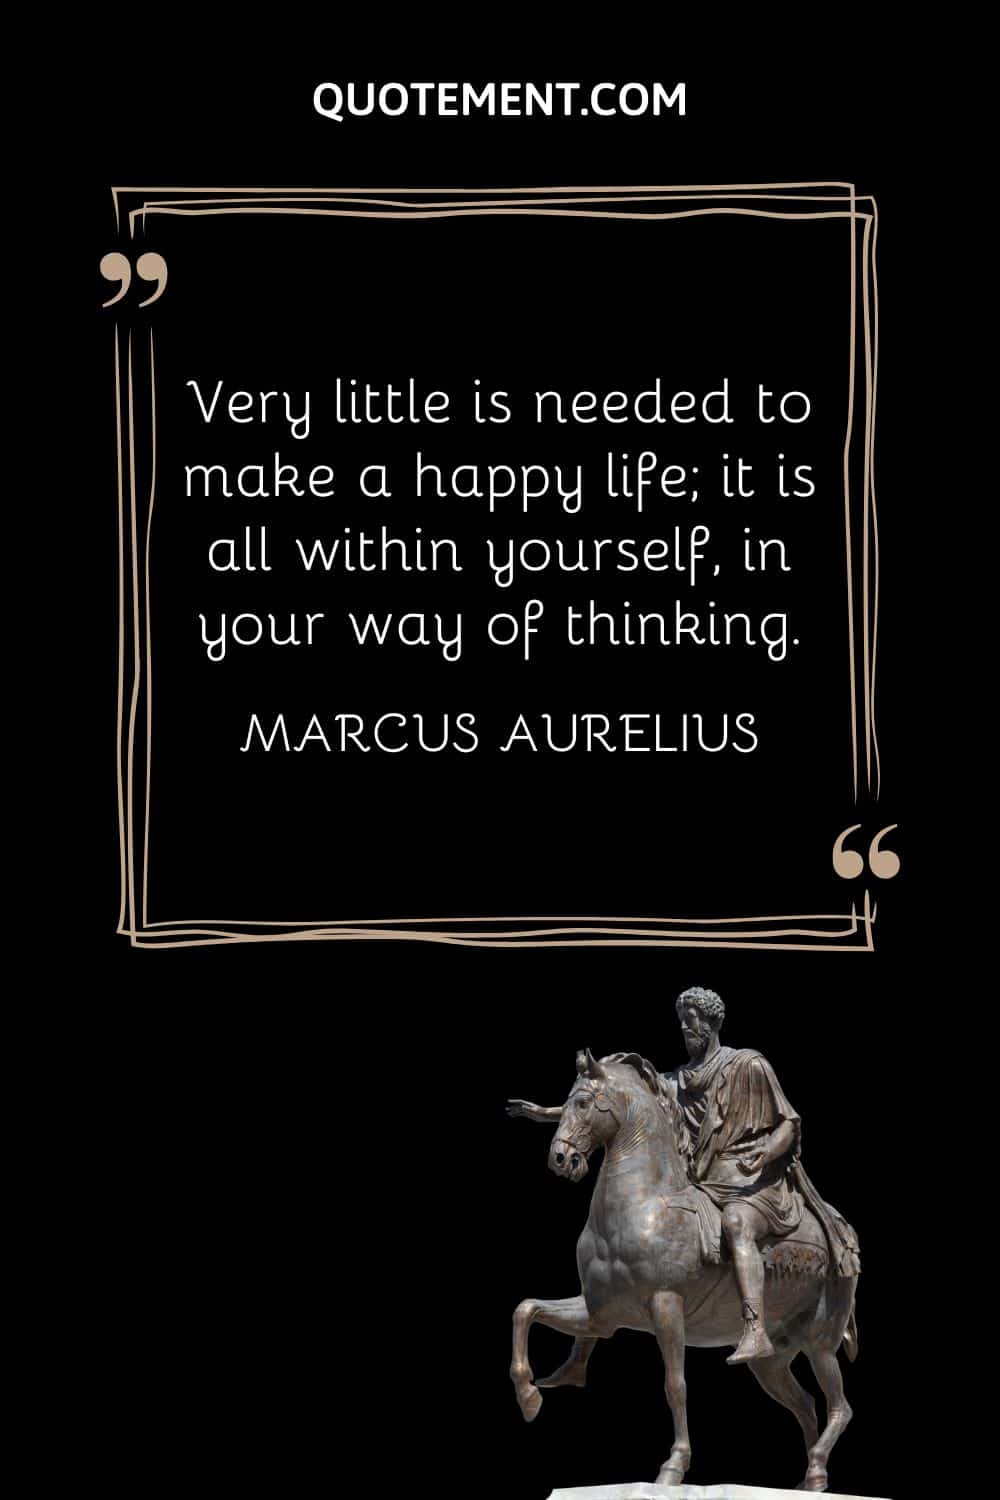 “Very little is needed to make a happy life; it is all within yourself, in your way of thinking.” — Marcus Aurelius